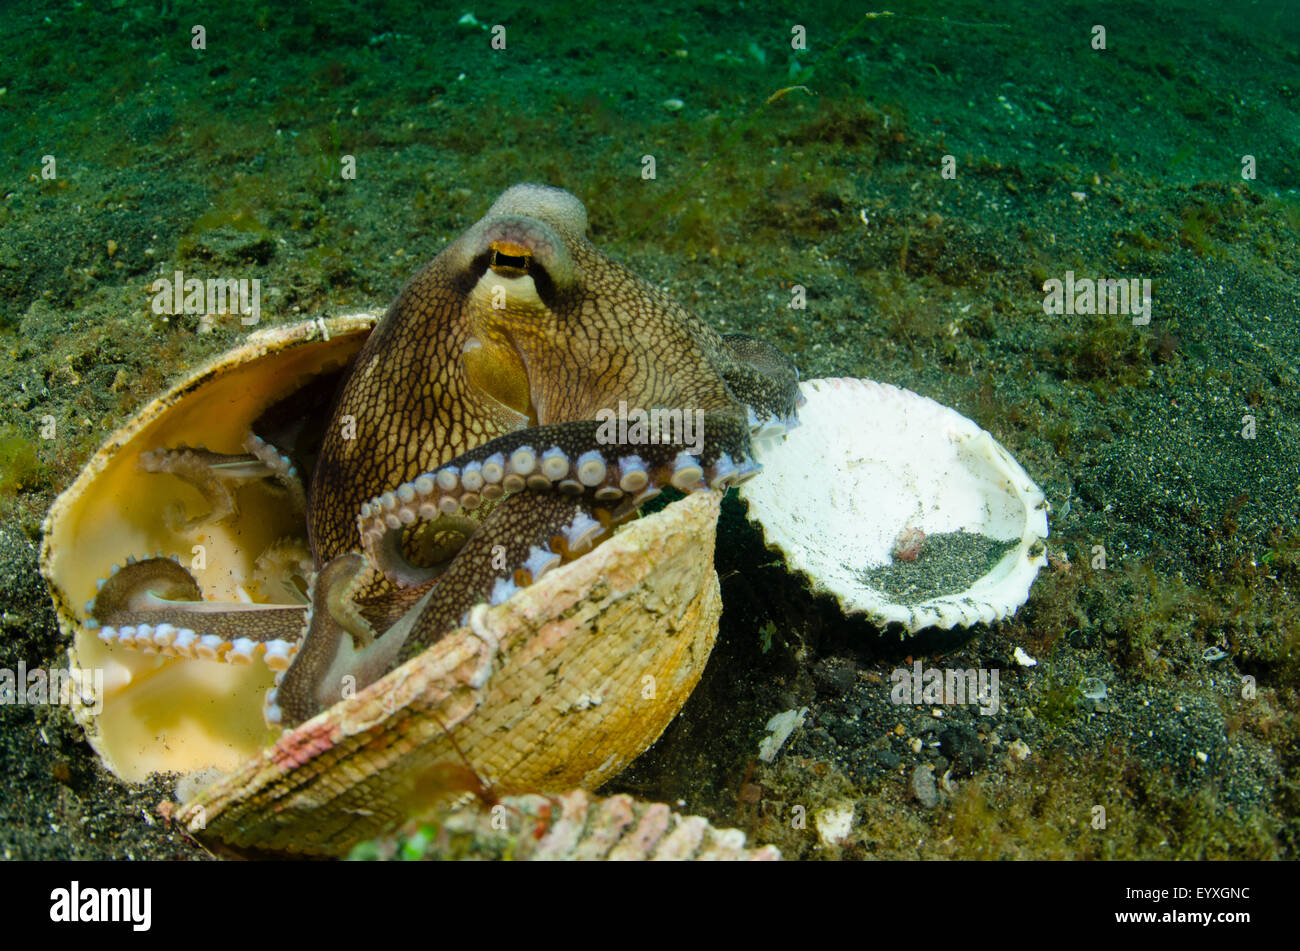 Coconut octopus and a collection of shells that it uses as a home, Amphioctopus marginatus, Lembeh Strait, North Sulawesi Stock Photo